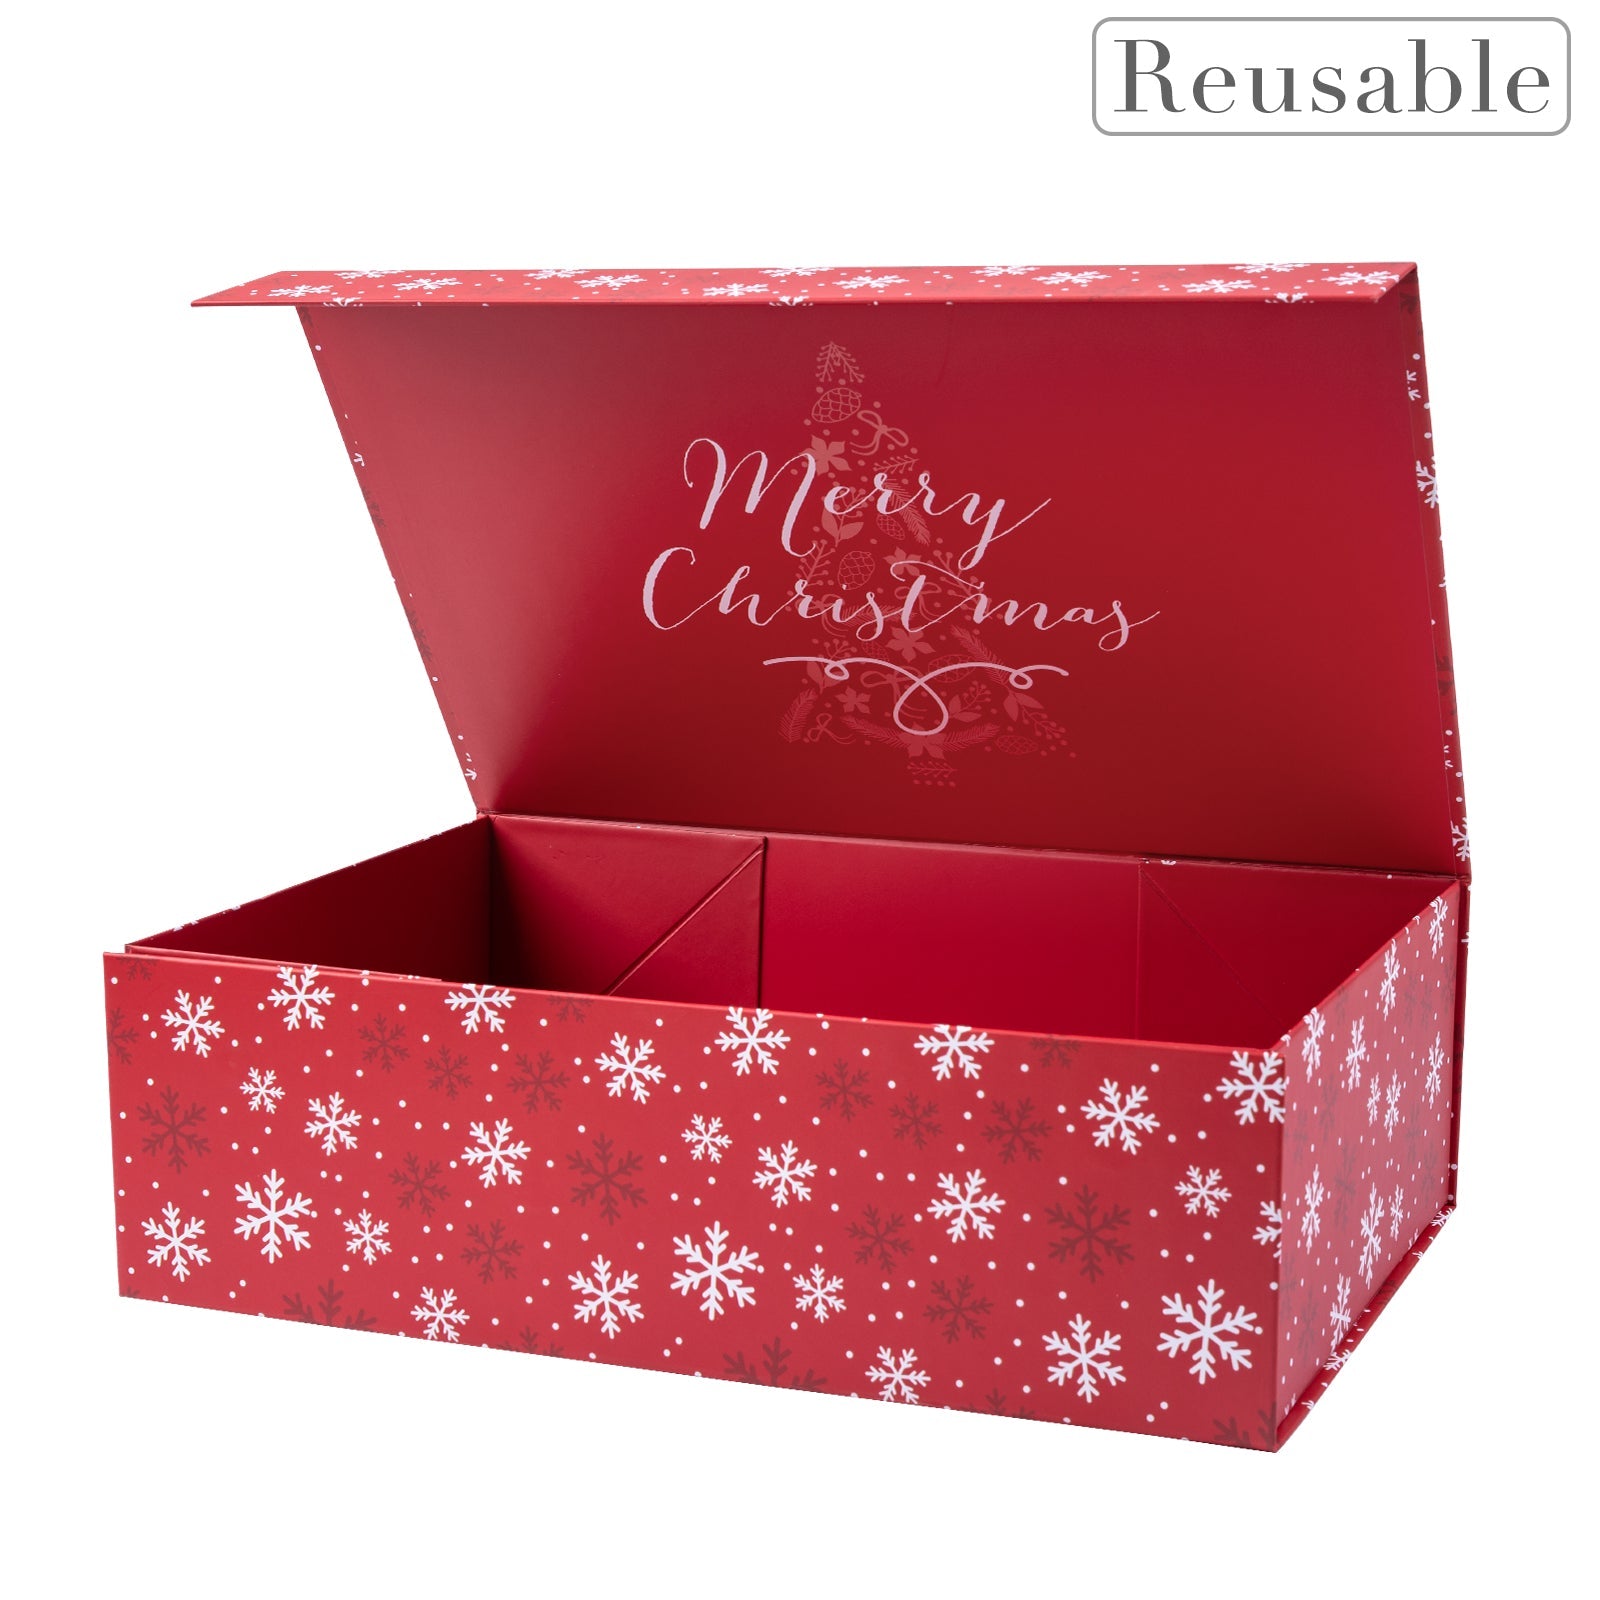 14x9x4.3 inch Collapsible Gift Box with Magnetic Closure - Snow Flake Red